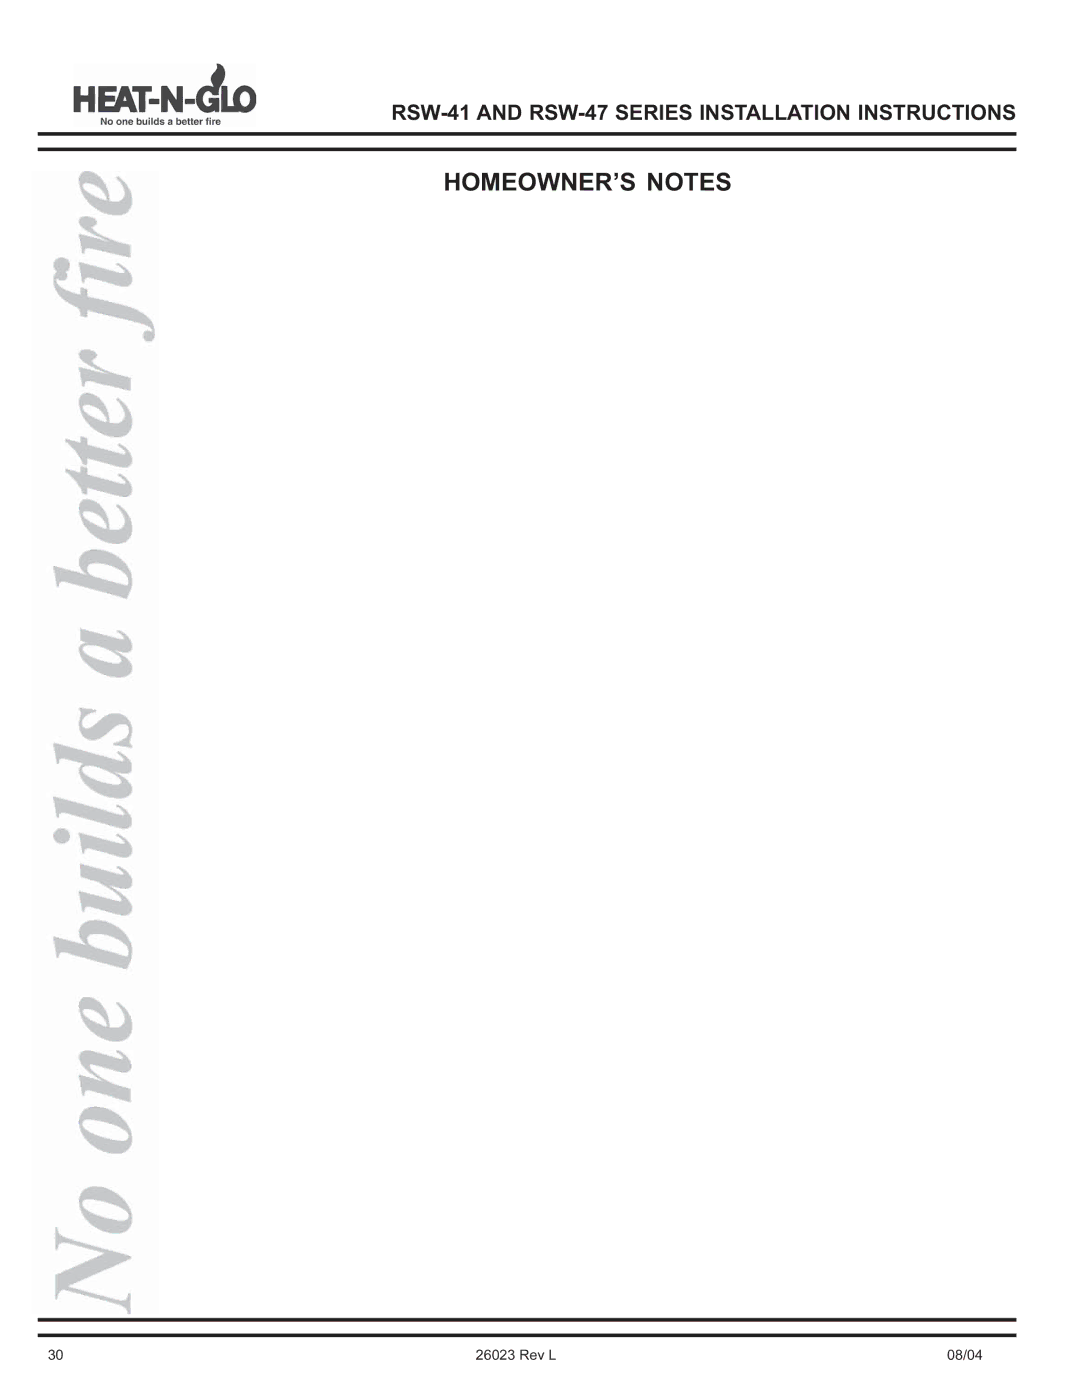 Hearth and Home Technologies RSW-41, RSW-47 manual HOMEOWNER’S Notes 